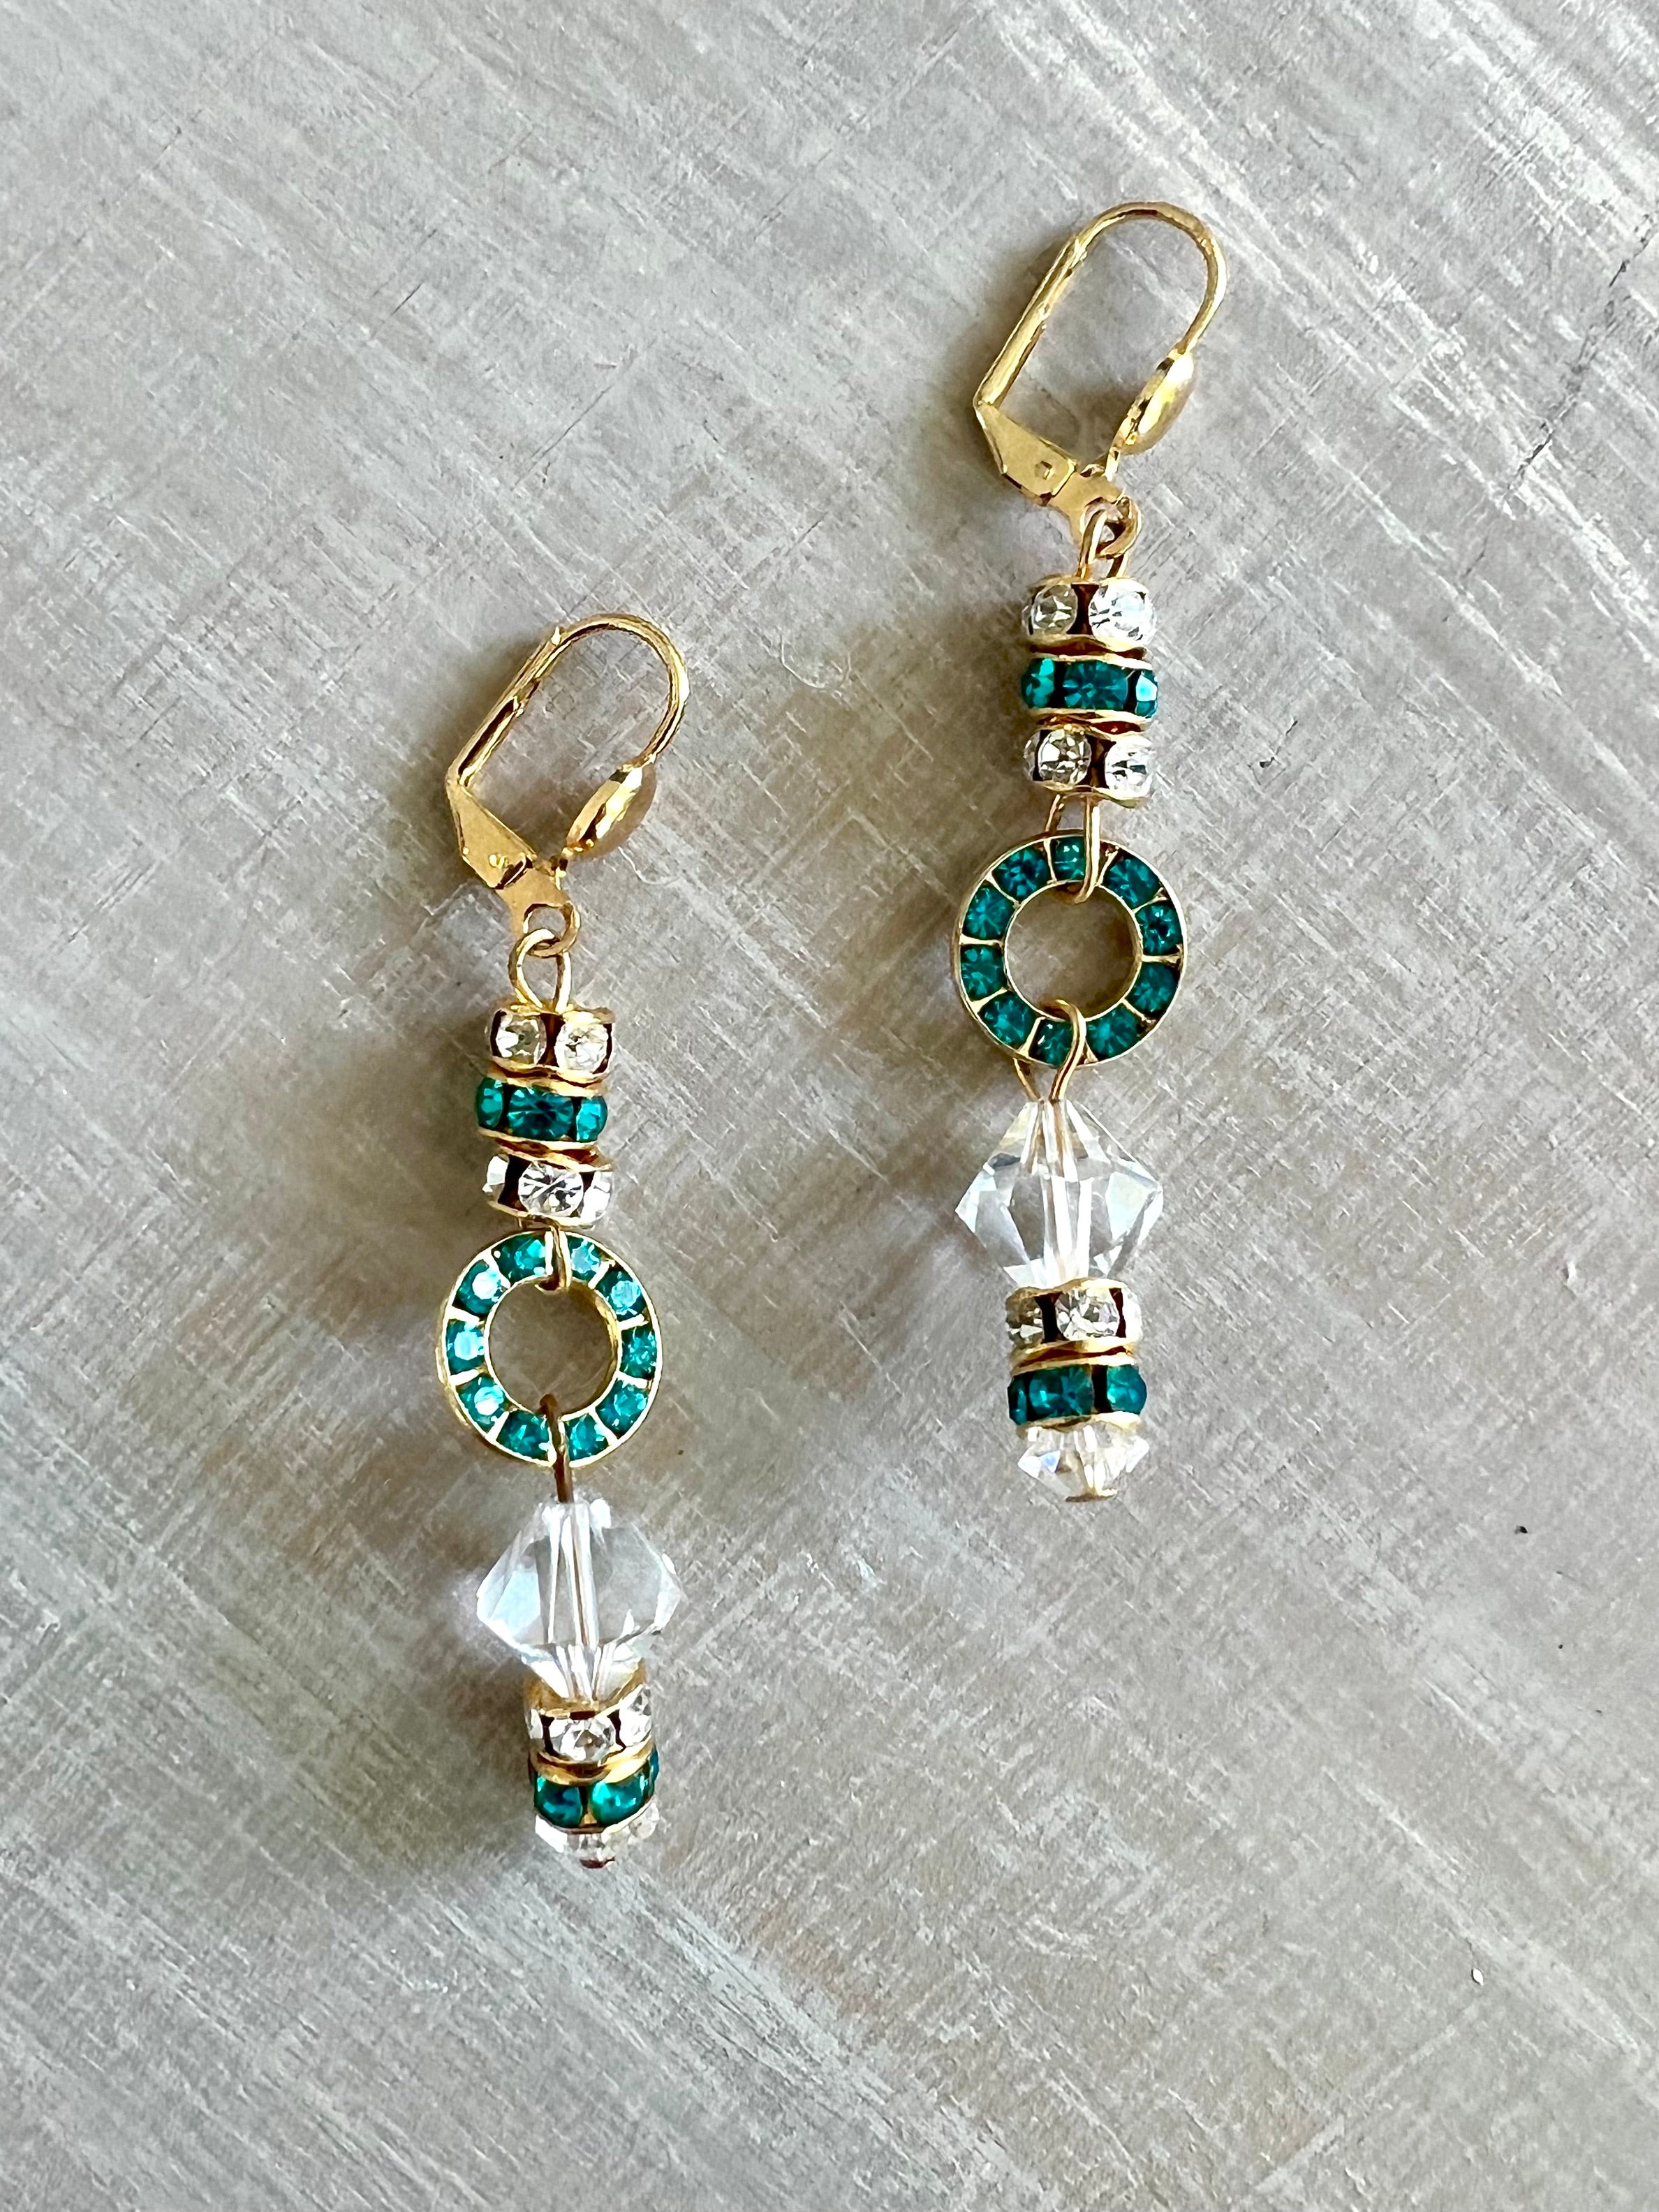 RGS-E059: Handcrafted Crystal Earrings